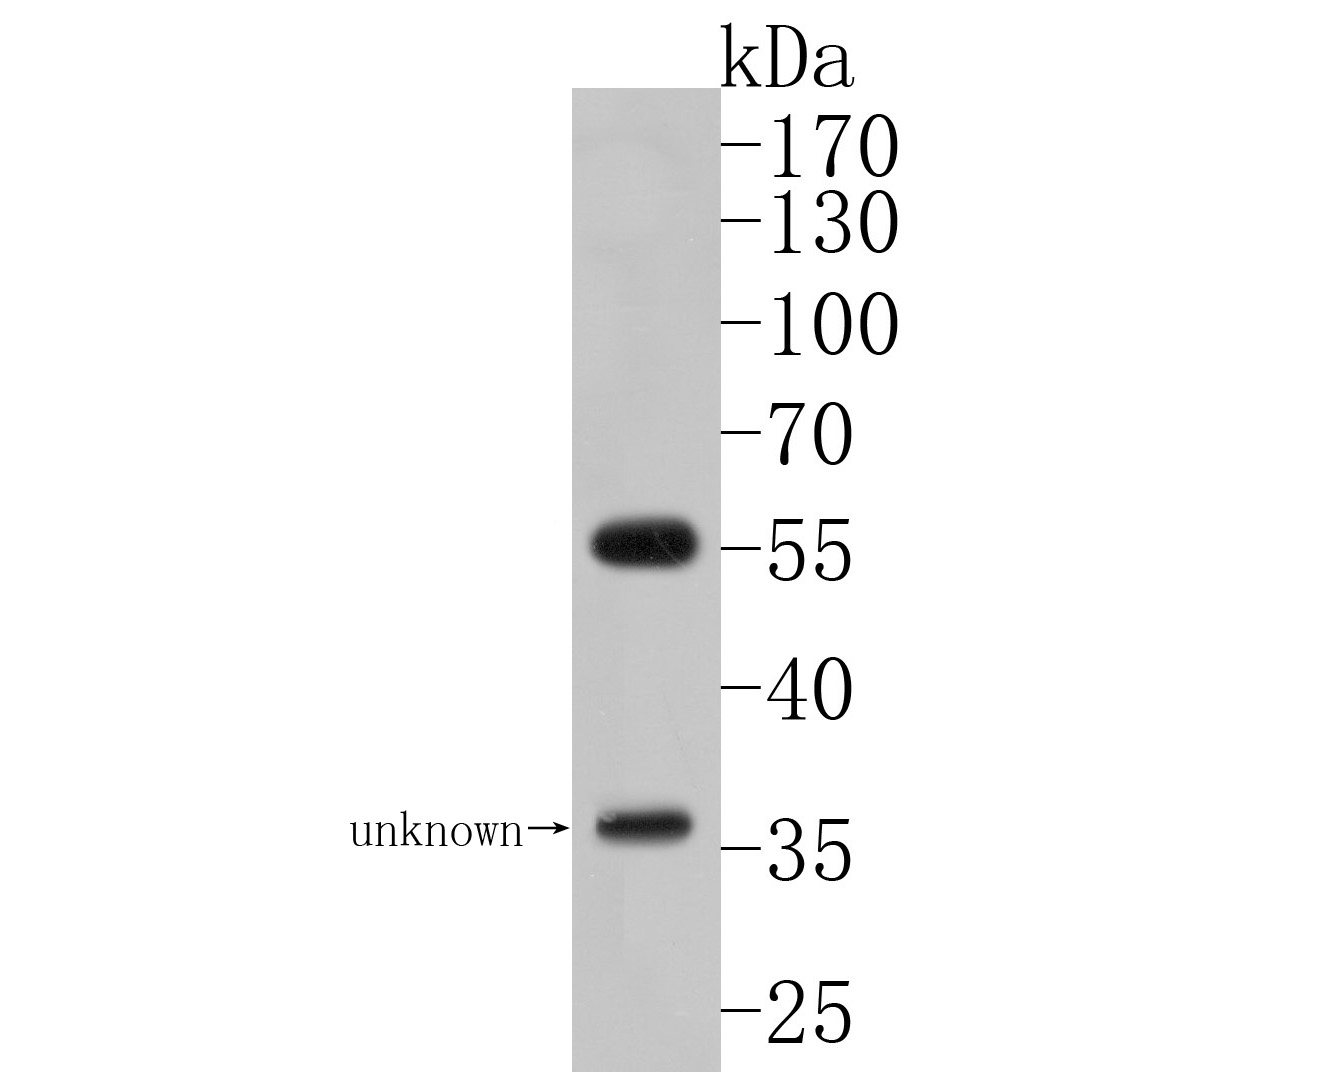 Western blot analysis of MCRS1 on SH-SY5Y cell lysates. Proteins were transferred to a PVDF membrane and blocked with 5% BSA in PBS for 1 hour at room temperature. The primary antibody (HA500120, 1/500) was used in 5% BSA at room temperature for 2 hours. Goat Anti-Rabbit IgG - HRP Secondary Antibody (HA1001) at 1:5,000 dilution was used for 1 hour at room temperature.ne 2: SH-SY5Y cell lysate